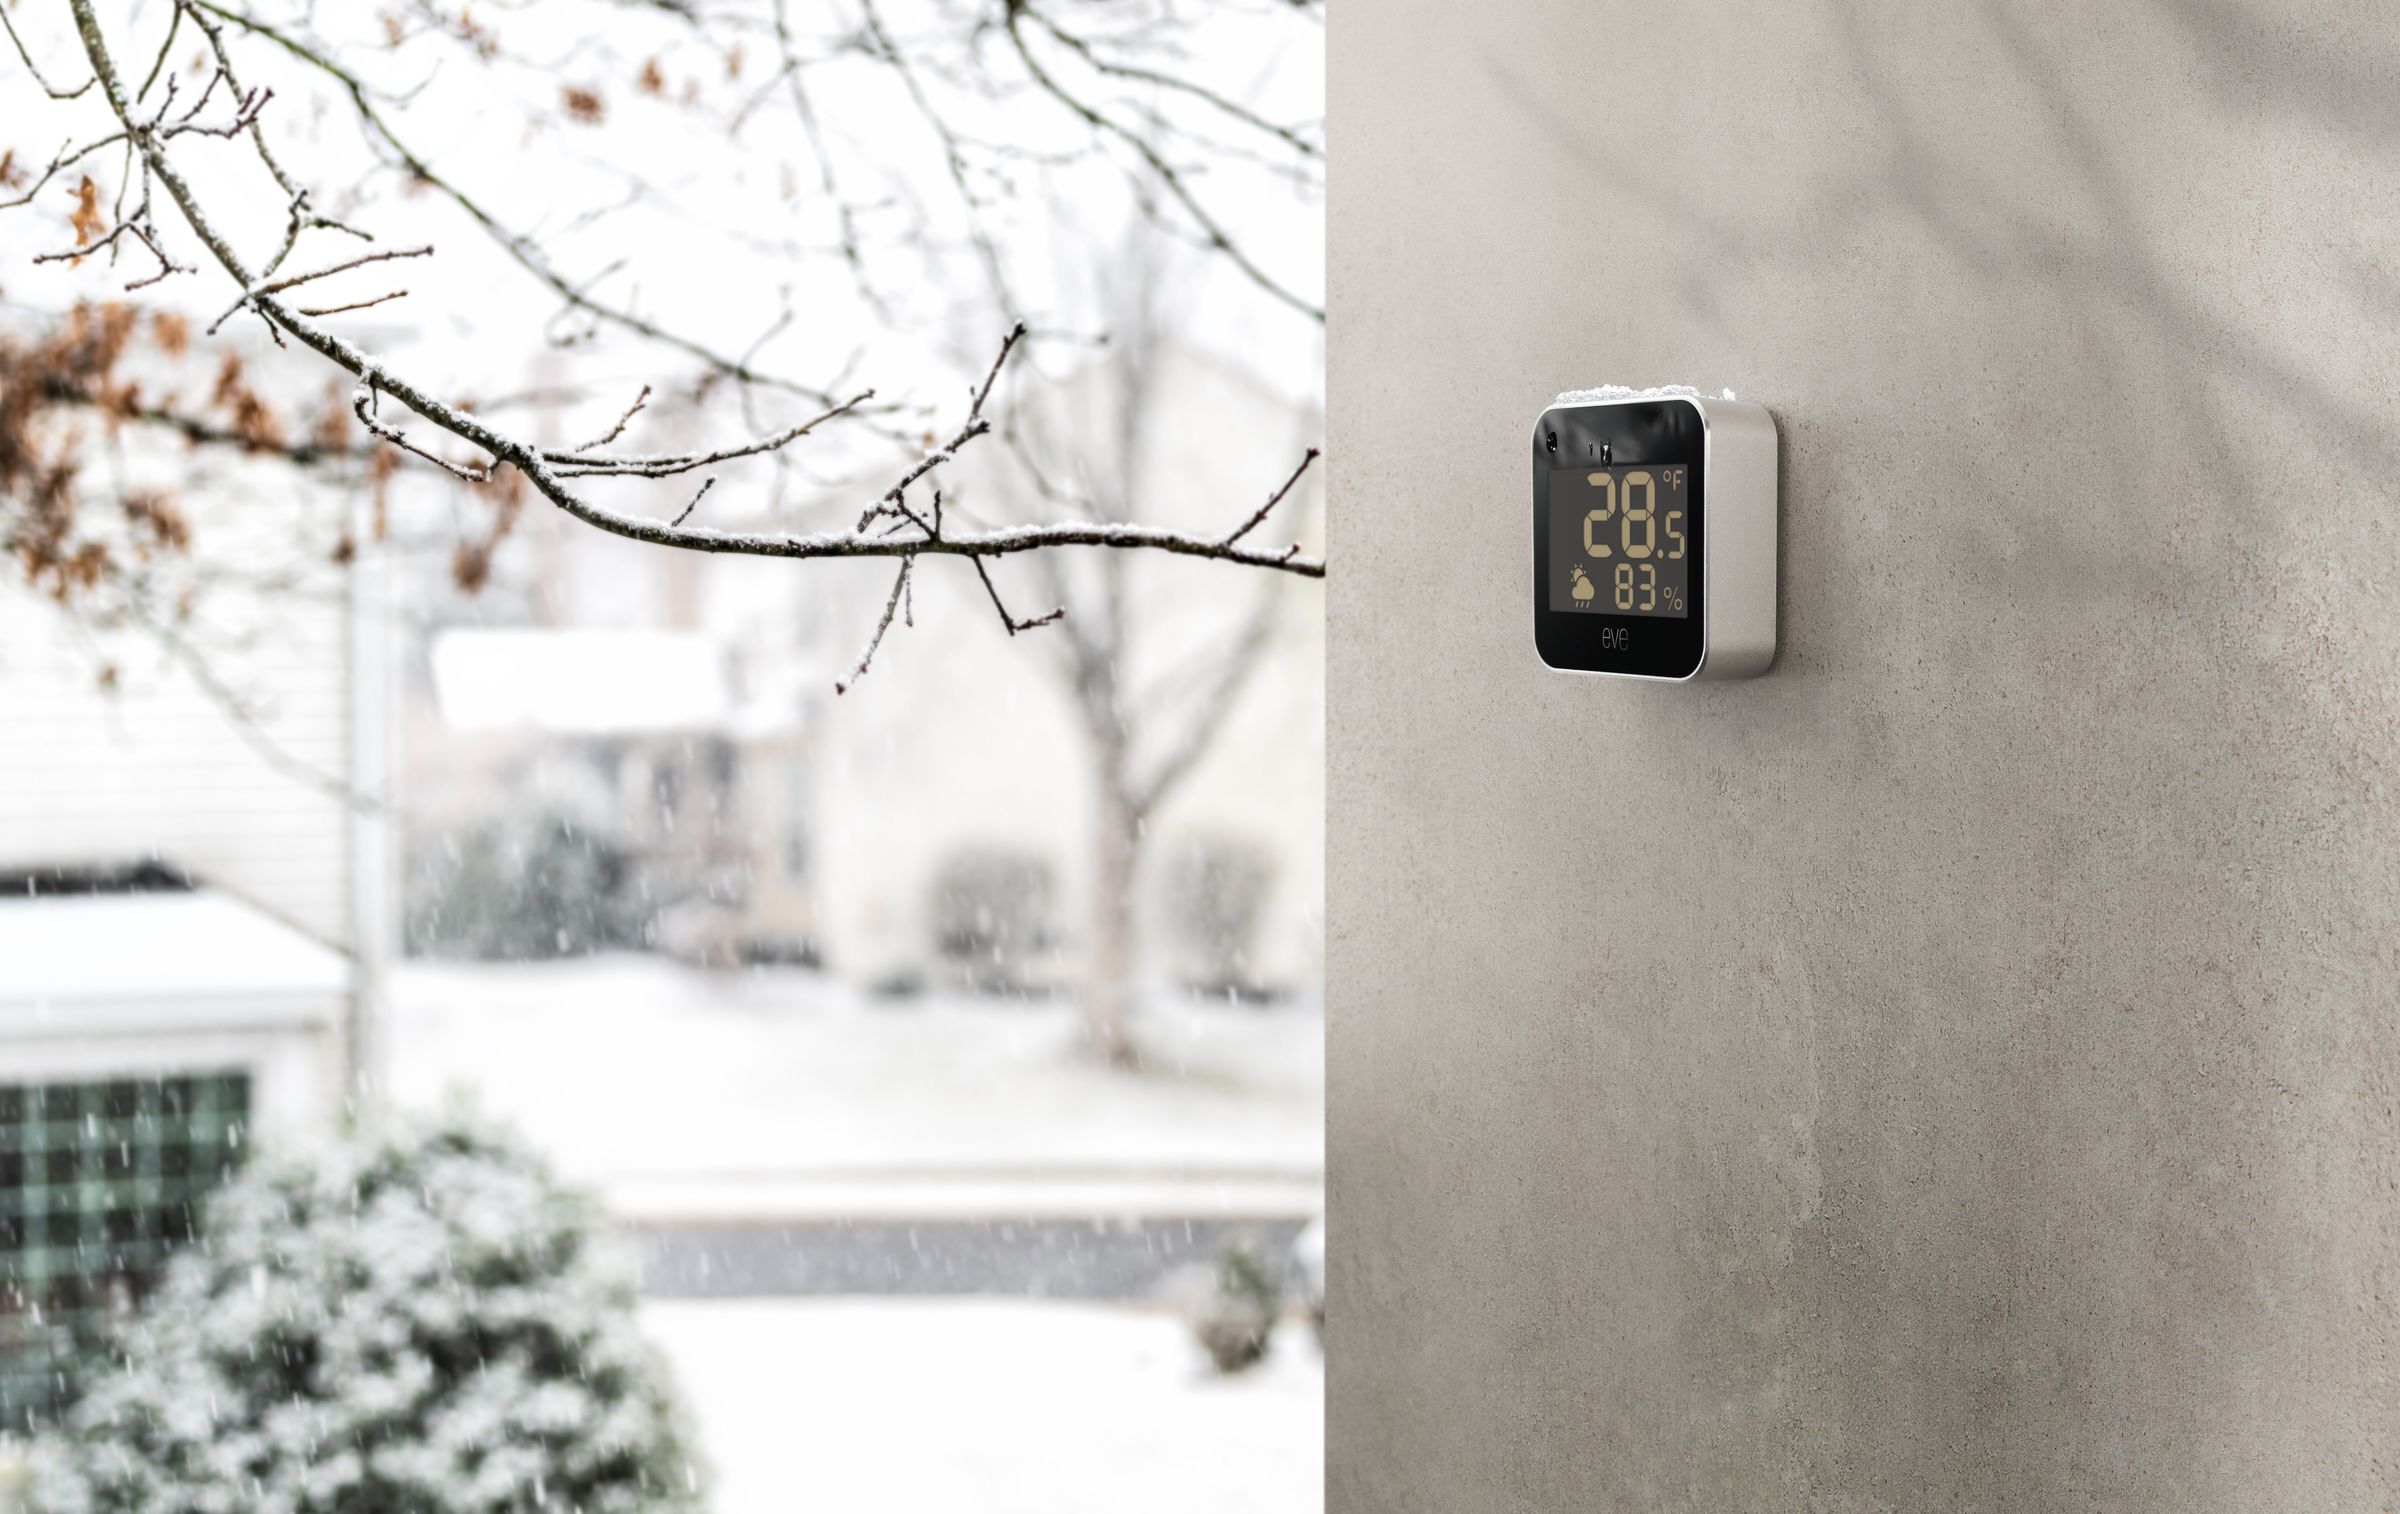 The Eve Weather is one of Eve’s ten products that have already received the hardware upgrade to Thread, along with the Eve Aqua, Eve Door & Window sensor, and Eve Energy smart plug.